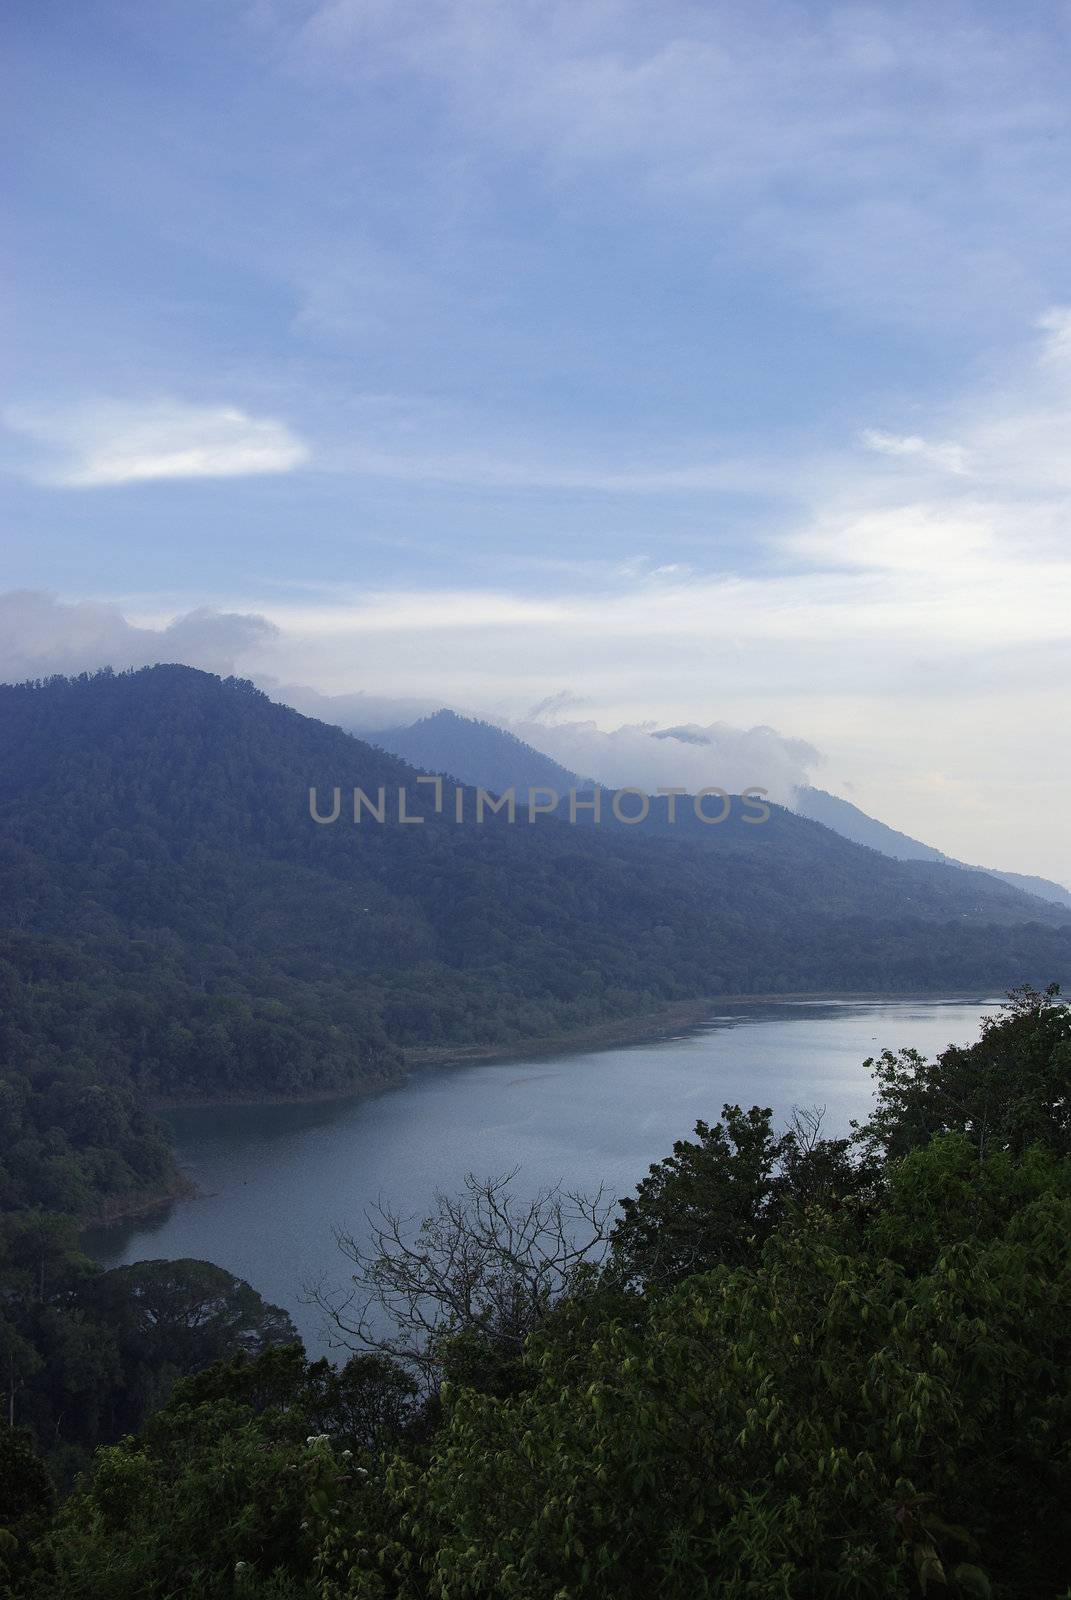 It's a view on one of four big lakes of Bali island, with lots of tropical forest